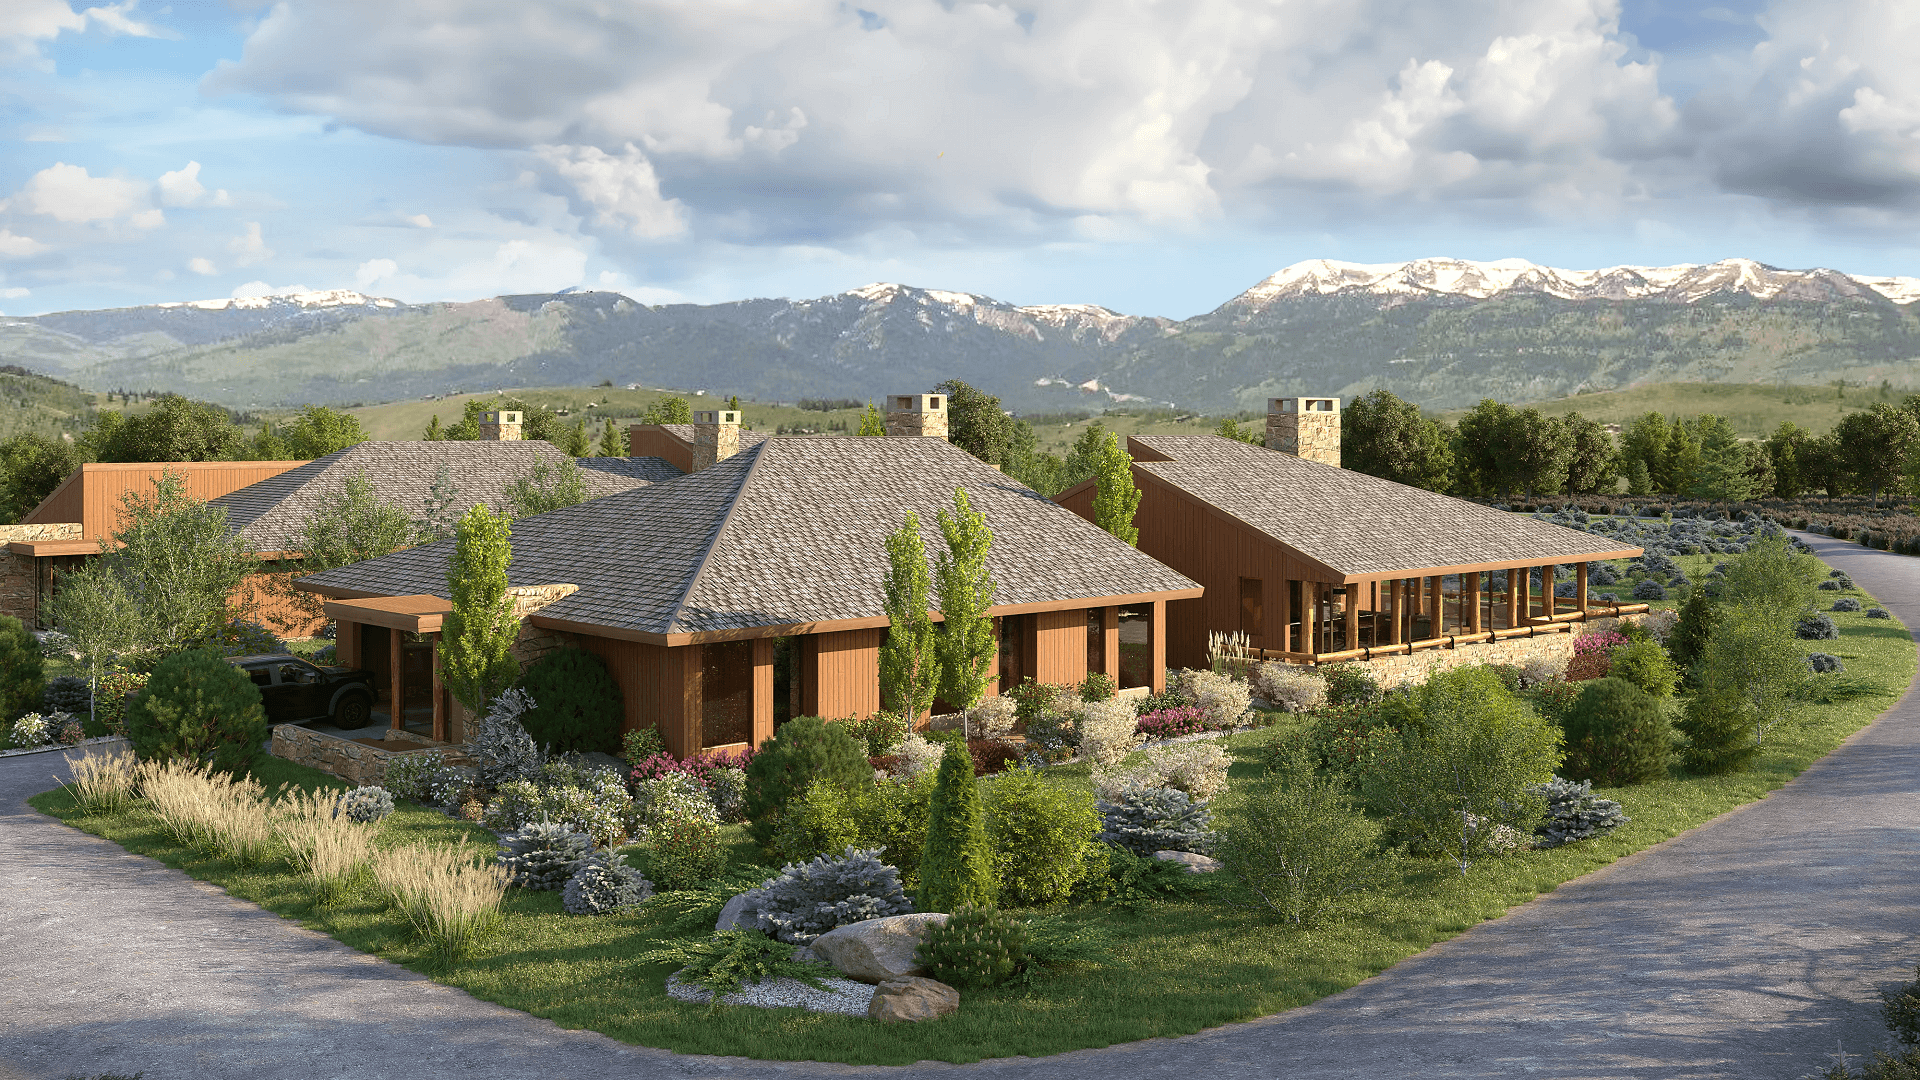 3D Architecture Rendering of a Mountain Resort